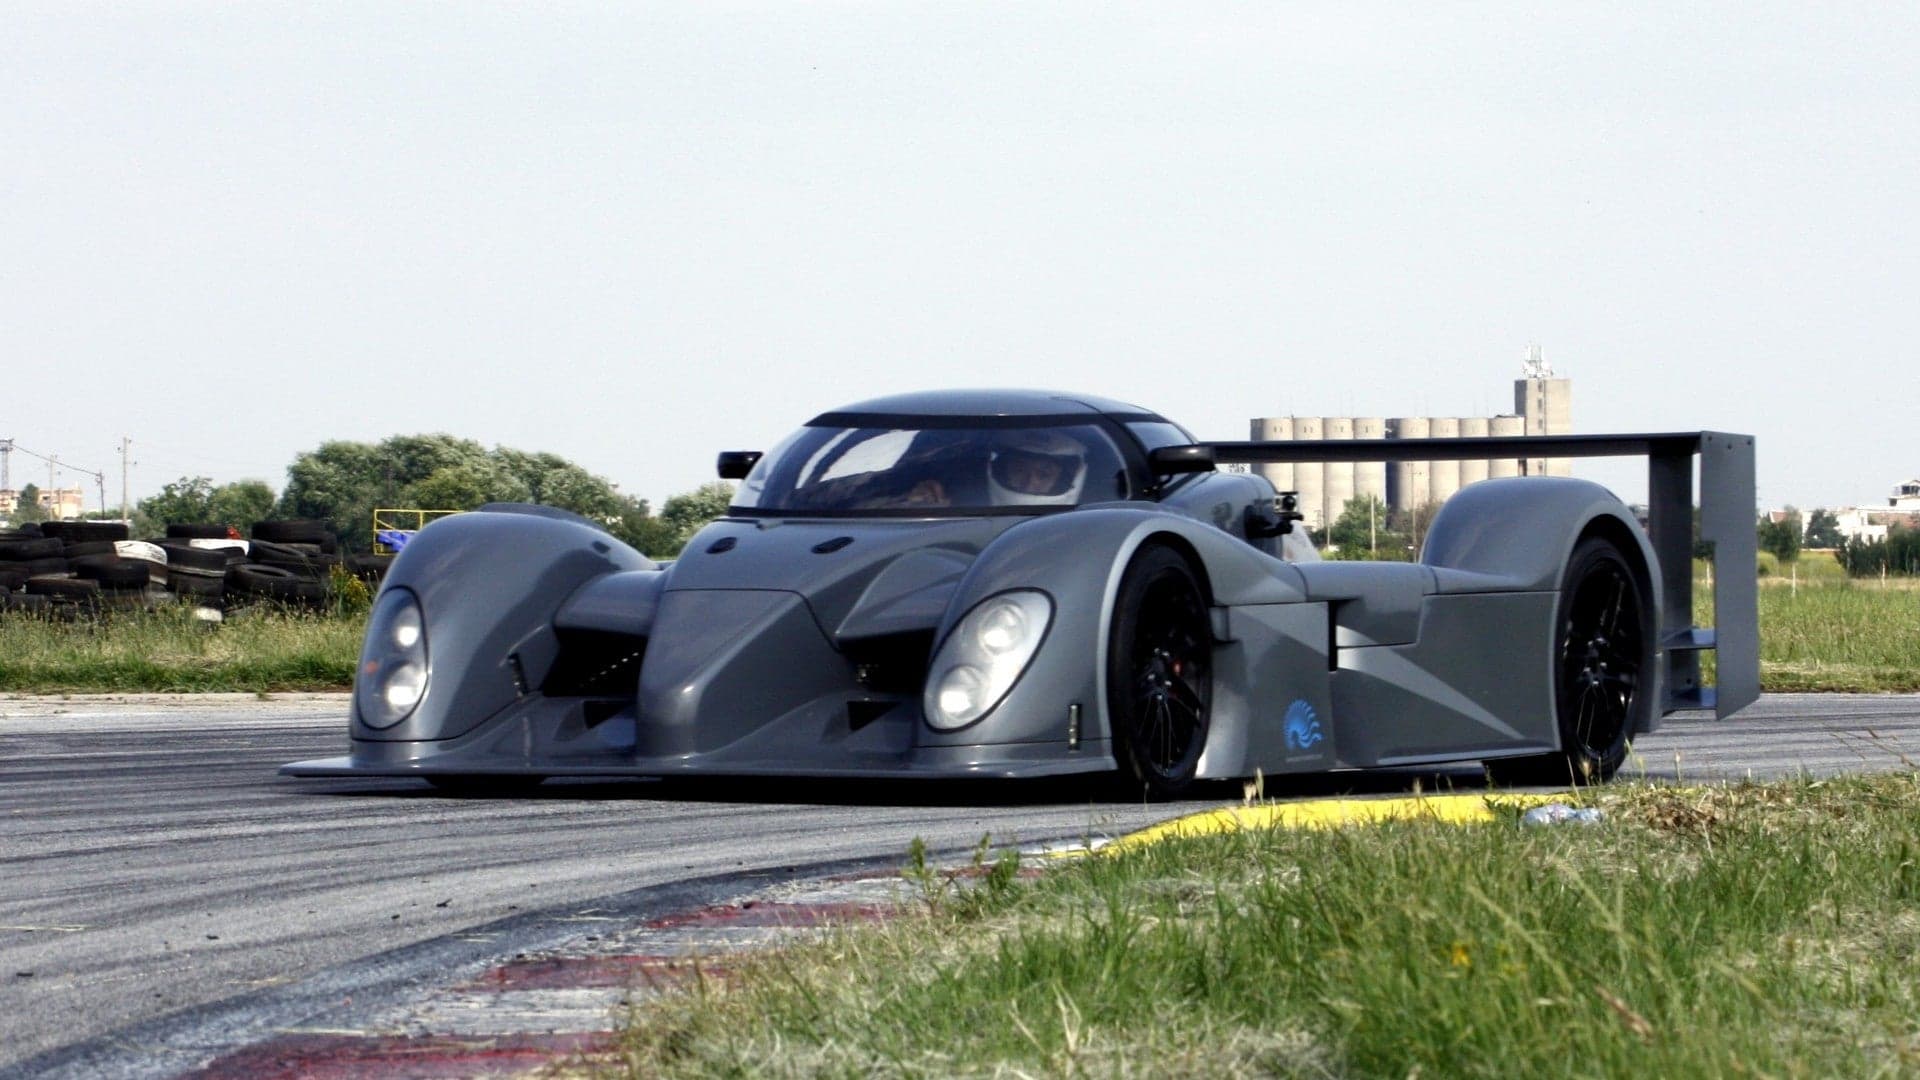 Build Your Own Le Mans Prototype-Style Race Car With This $24K Starter Kit